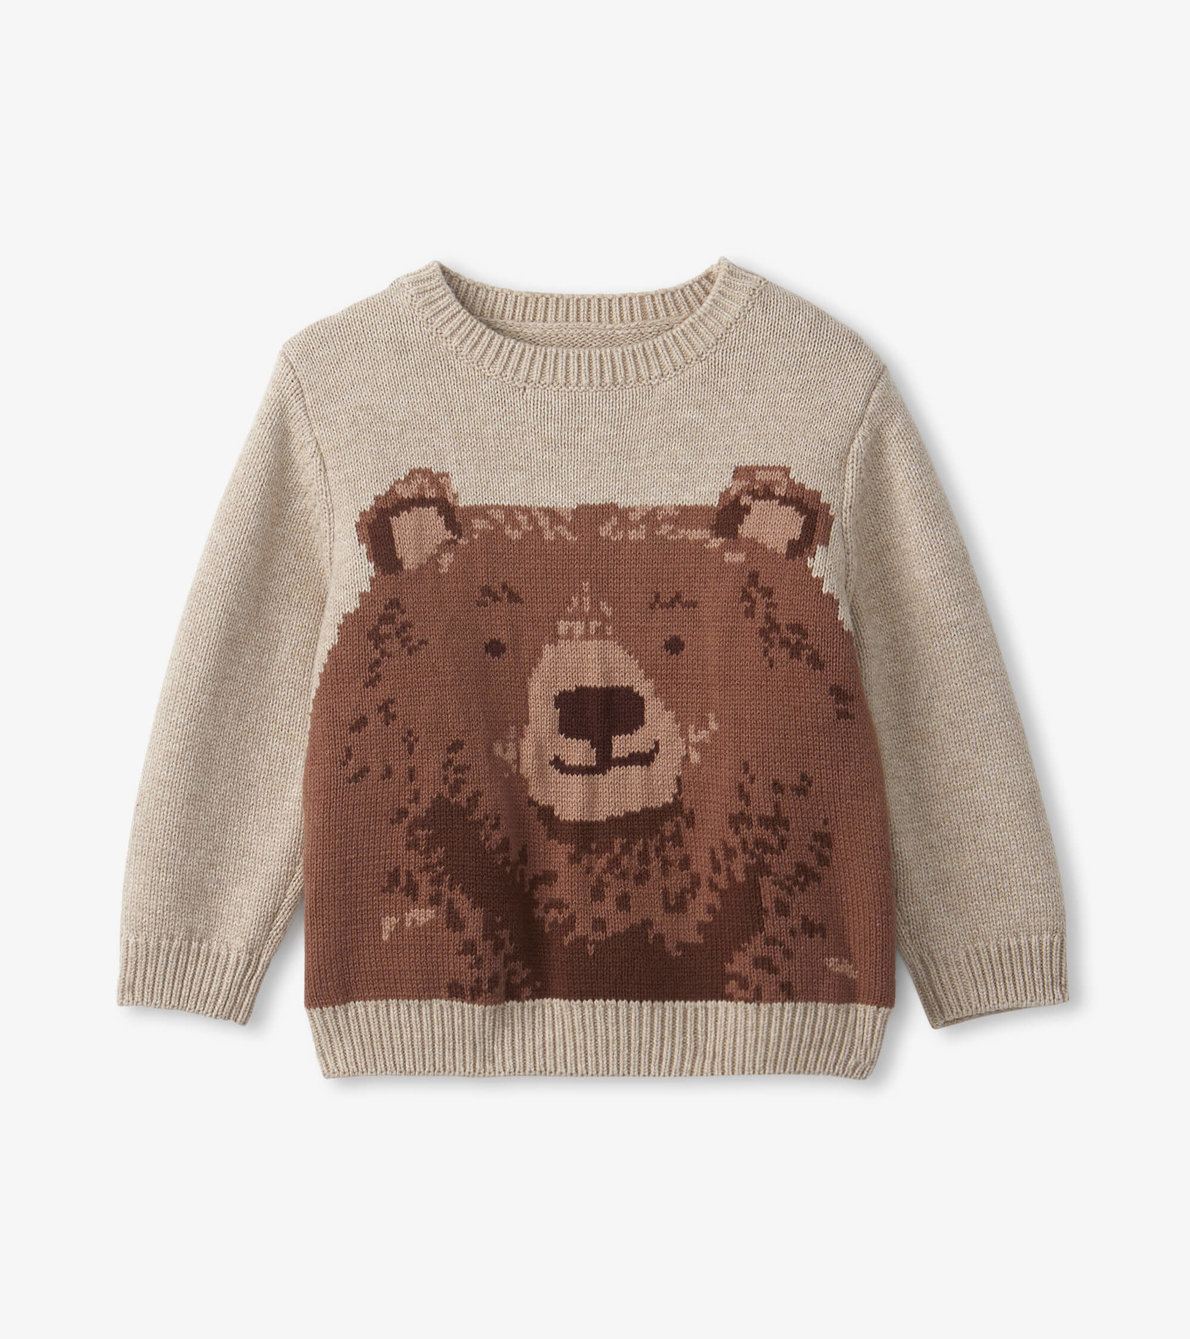 View larger image of Big Bear Crew Neck Knit Sweater